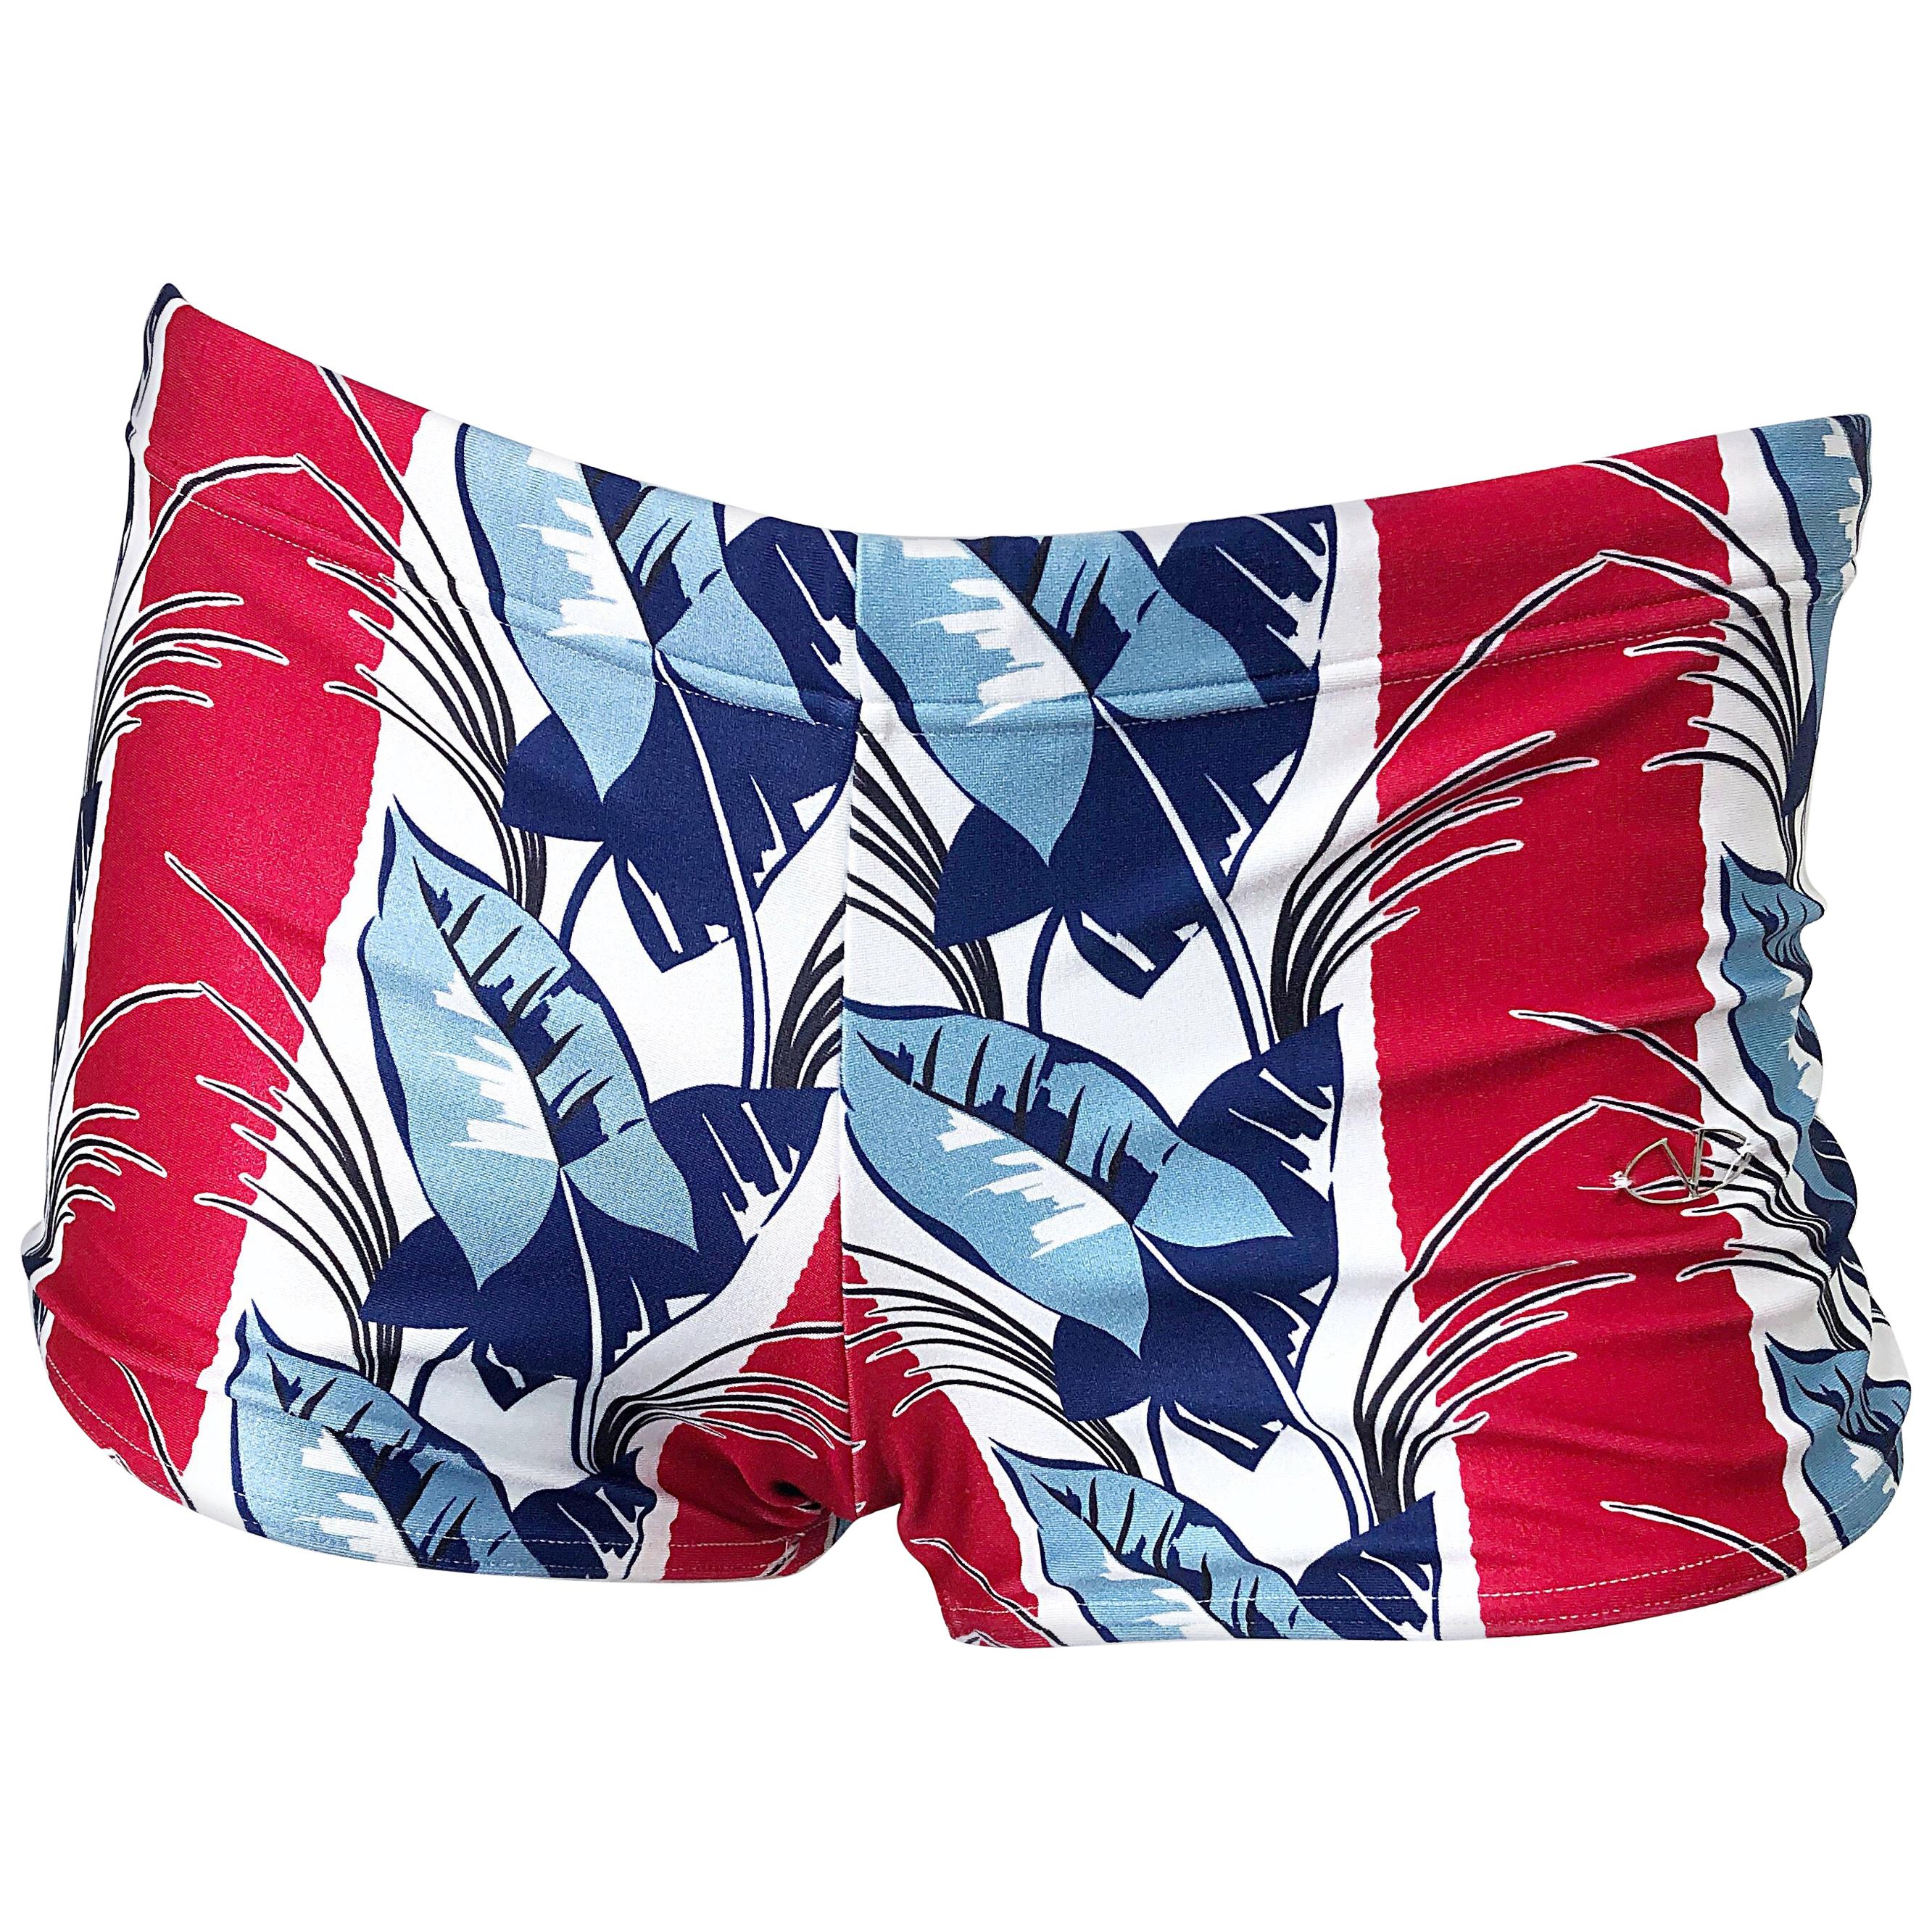 Valentino New 2000s Women's Red, White and Blue Boy Shorts Swimsuit Bottoms For Sale